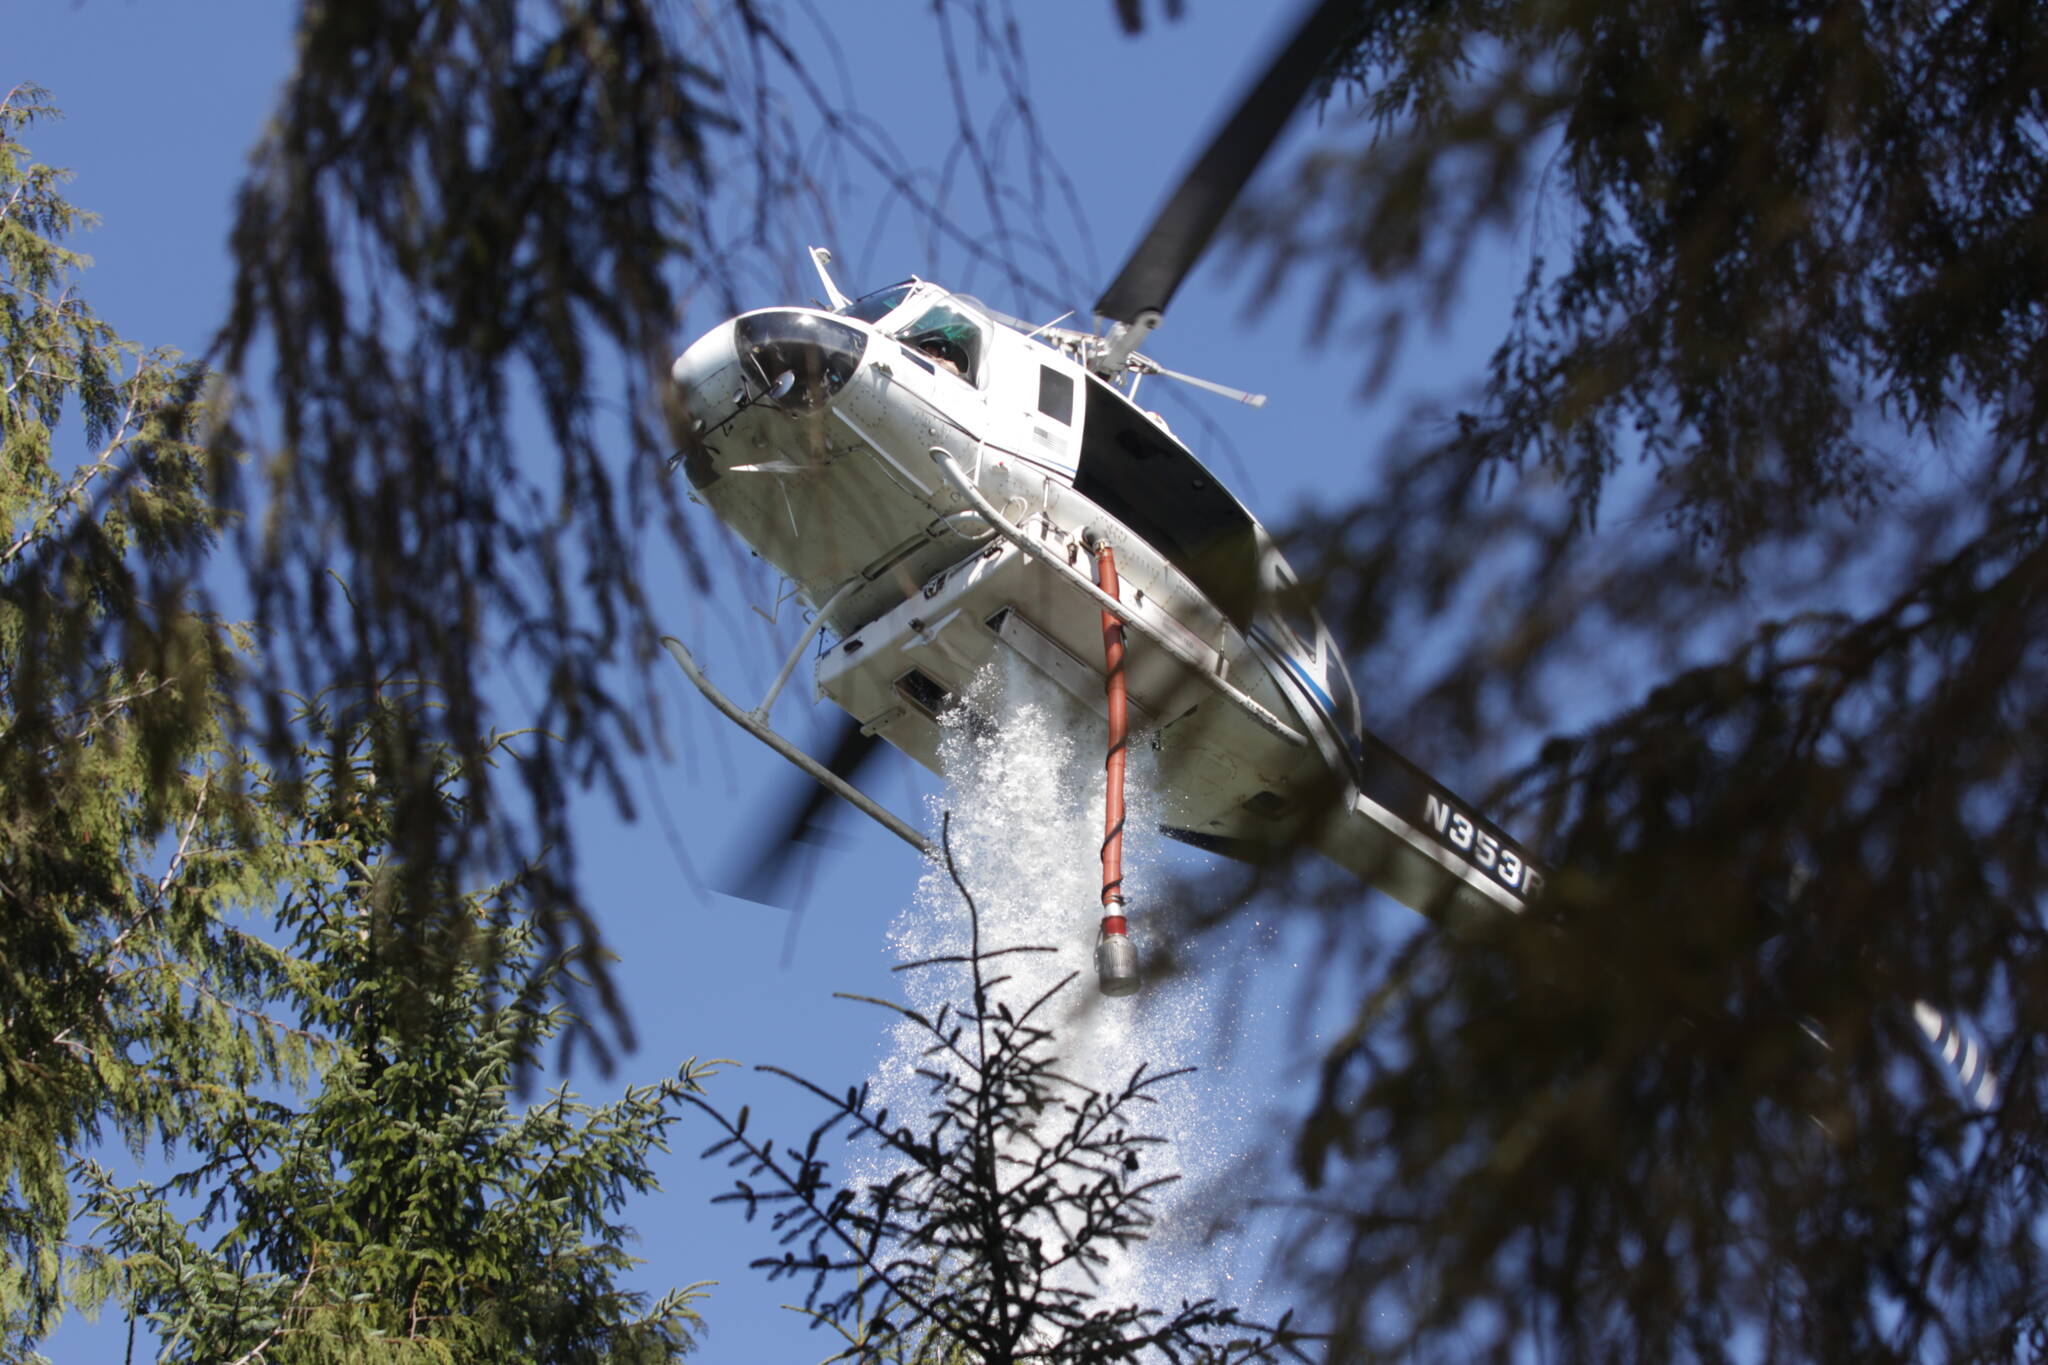 A helicopter drops water on the Margarita wildfire on August 4. (Michael S. Lockett / The Daily World)